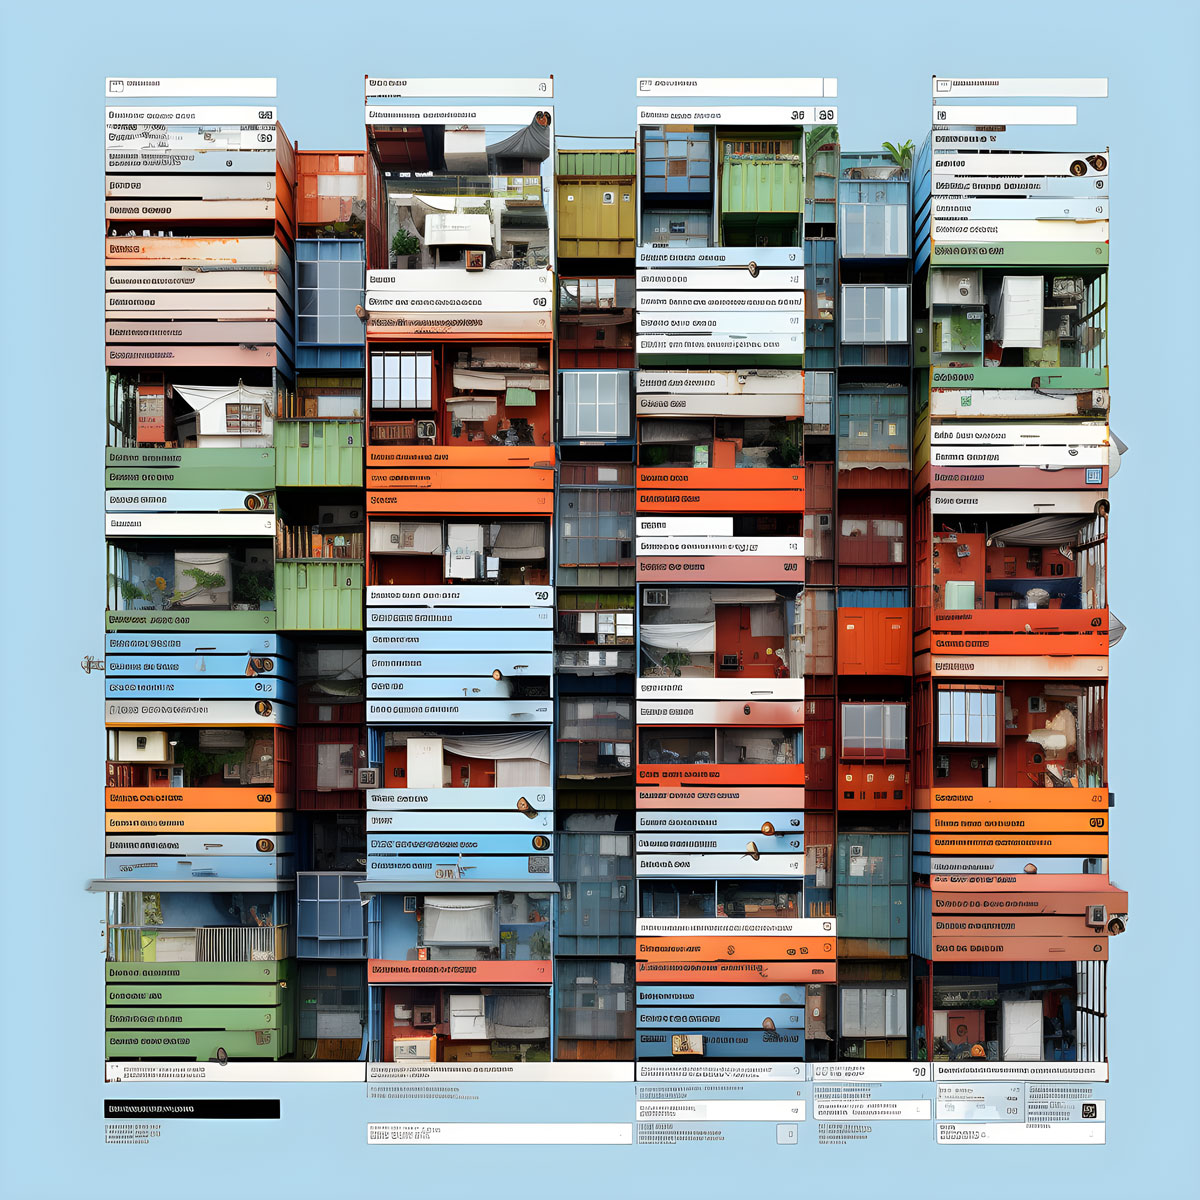 Container_City_Transformation_web